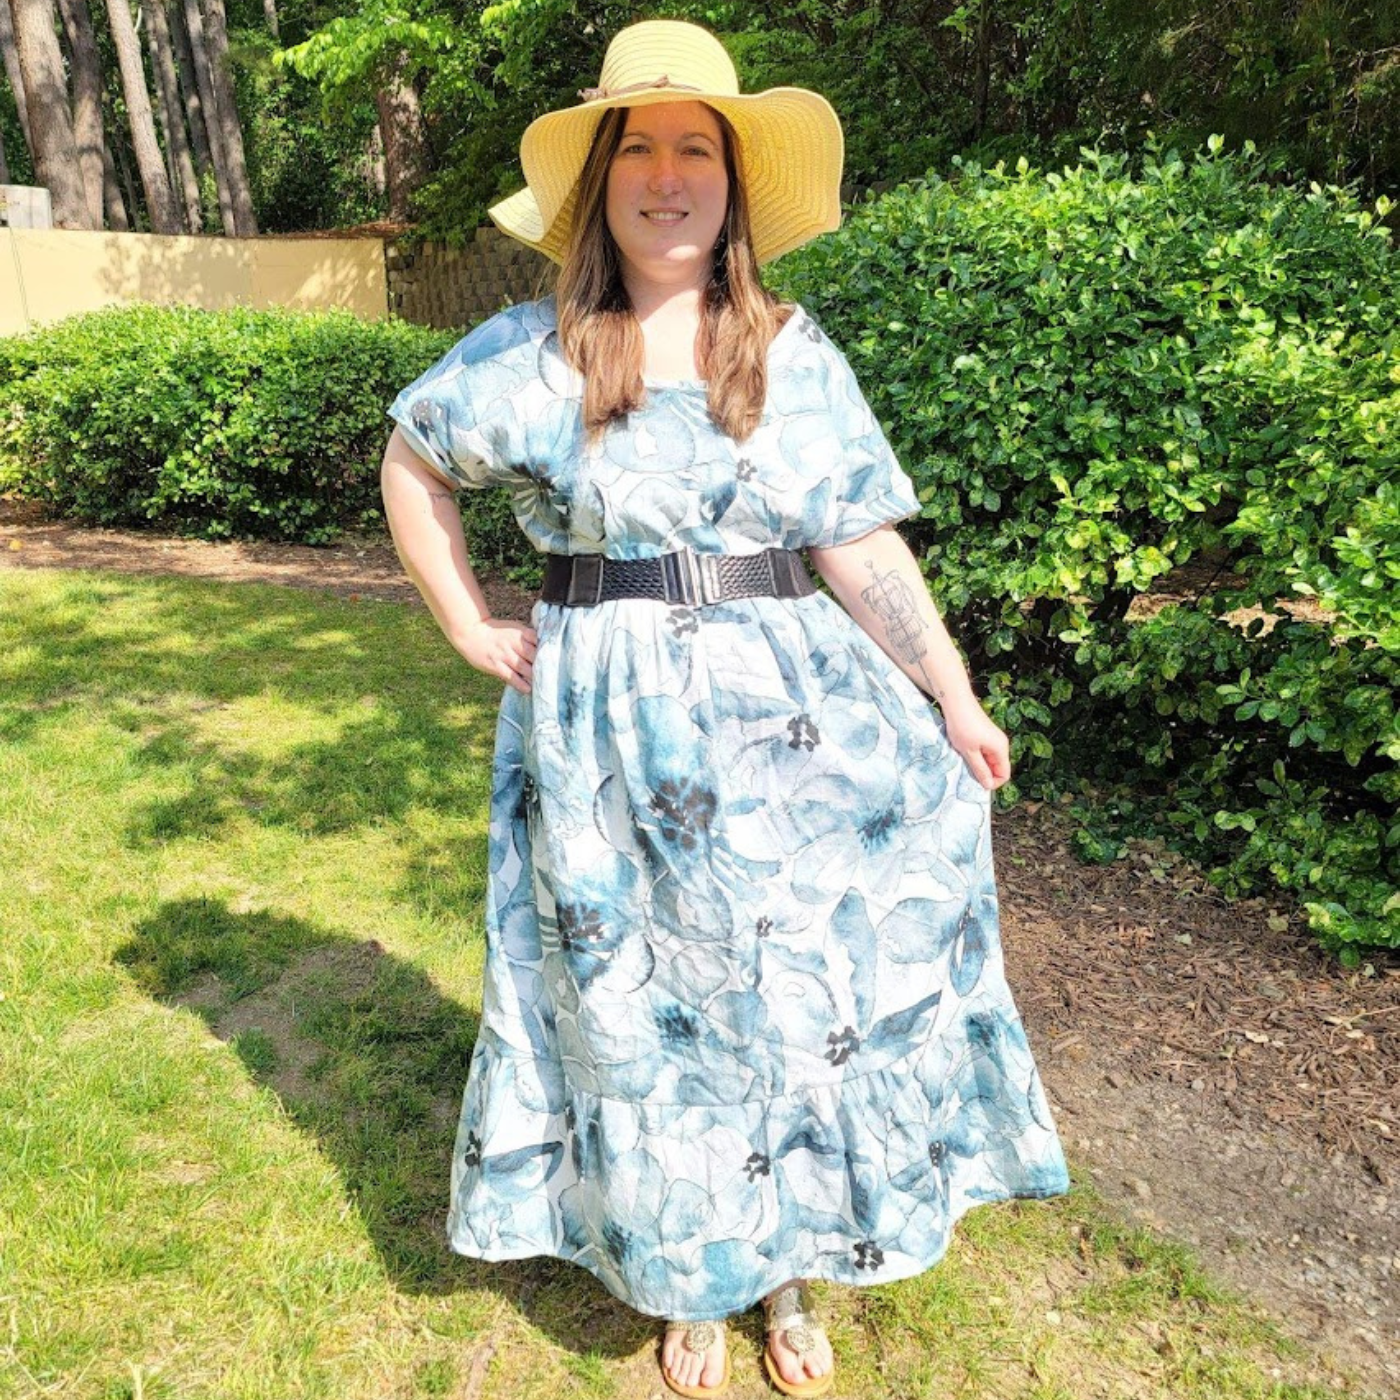 Sarah stands in the grass, smiling at the camera. She is wearing a light brown sunhat and a long dress with a black belt at the waist. The dress has a white background and a watercolor blue flower design. The flowers have black centers.